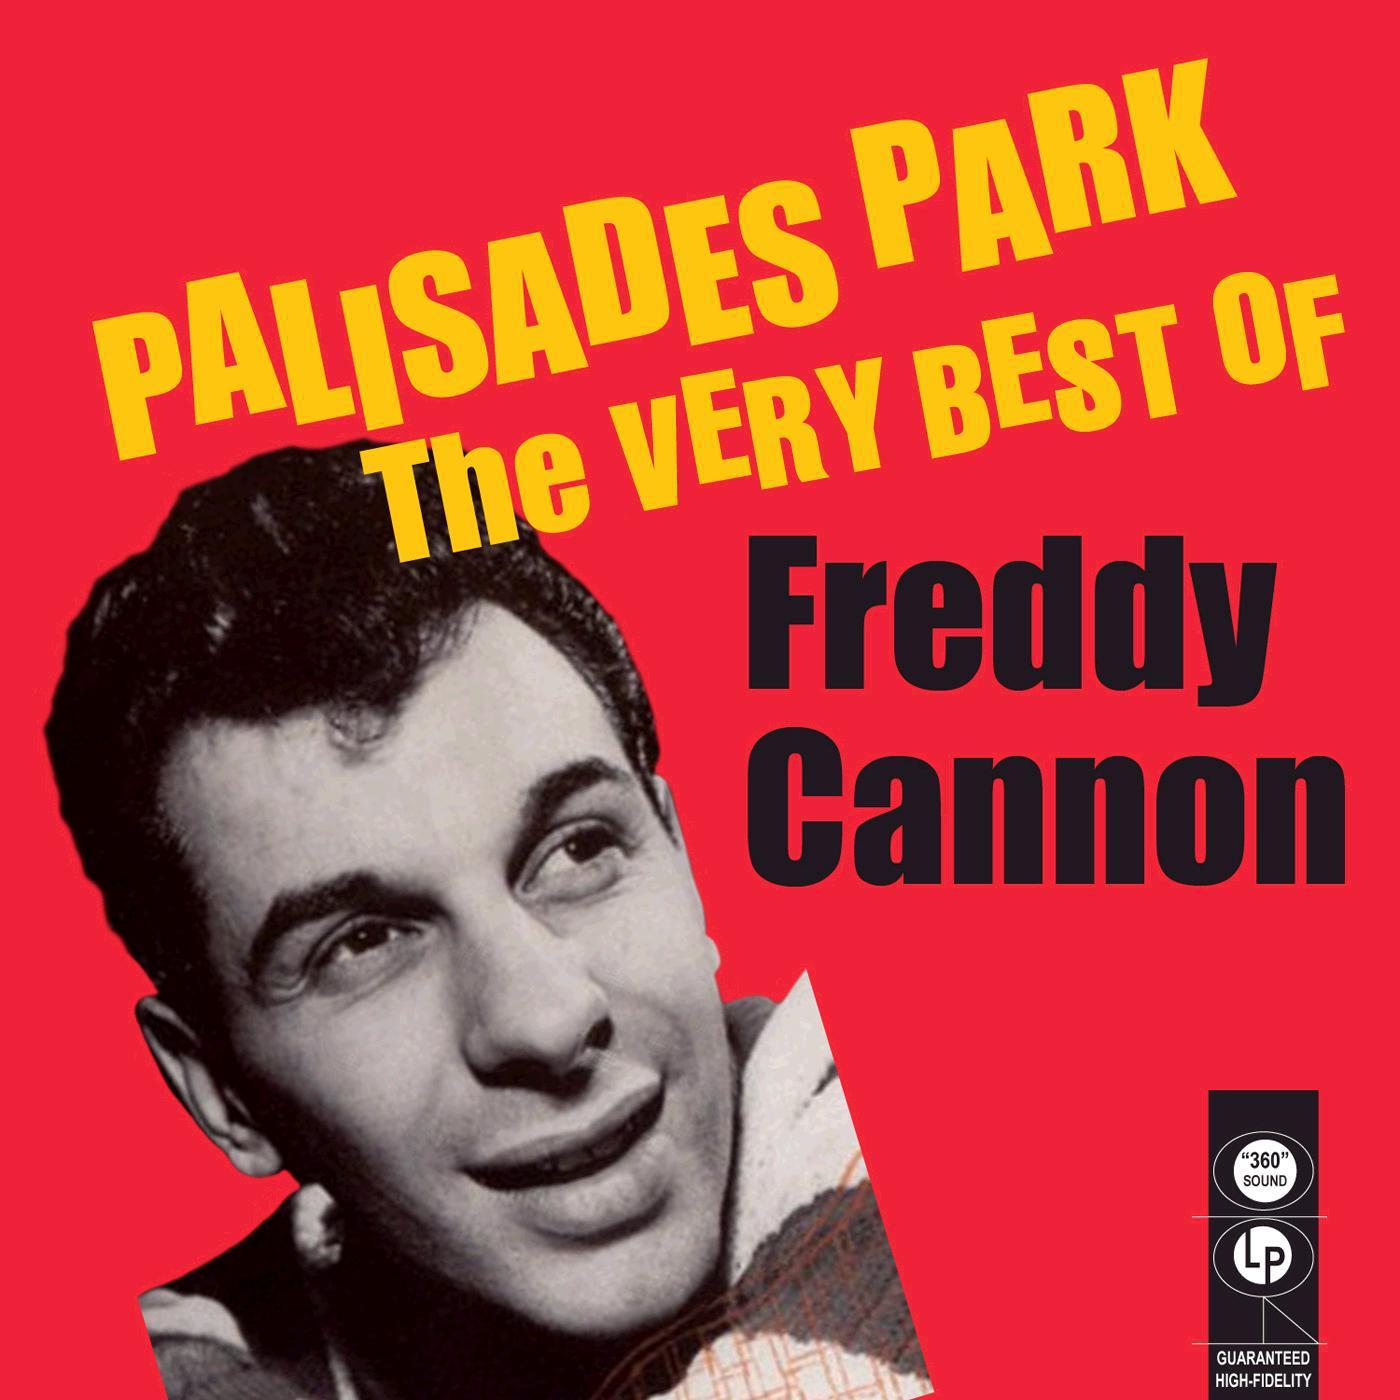 Palisades Park: the Very Best of